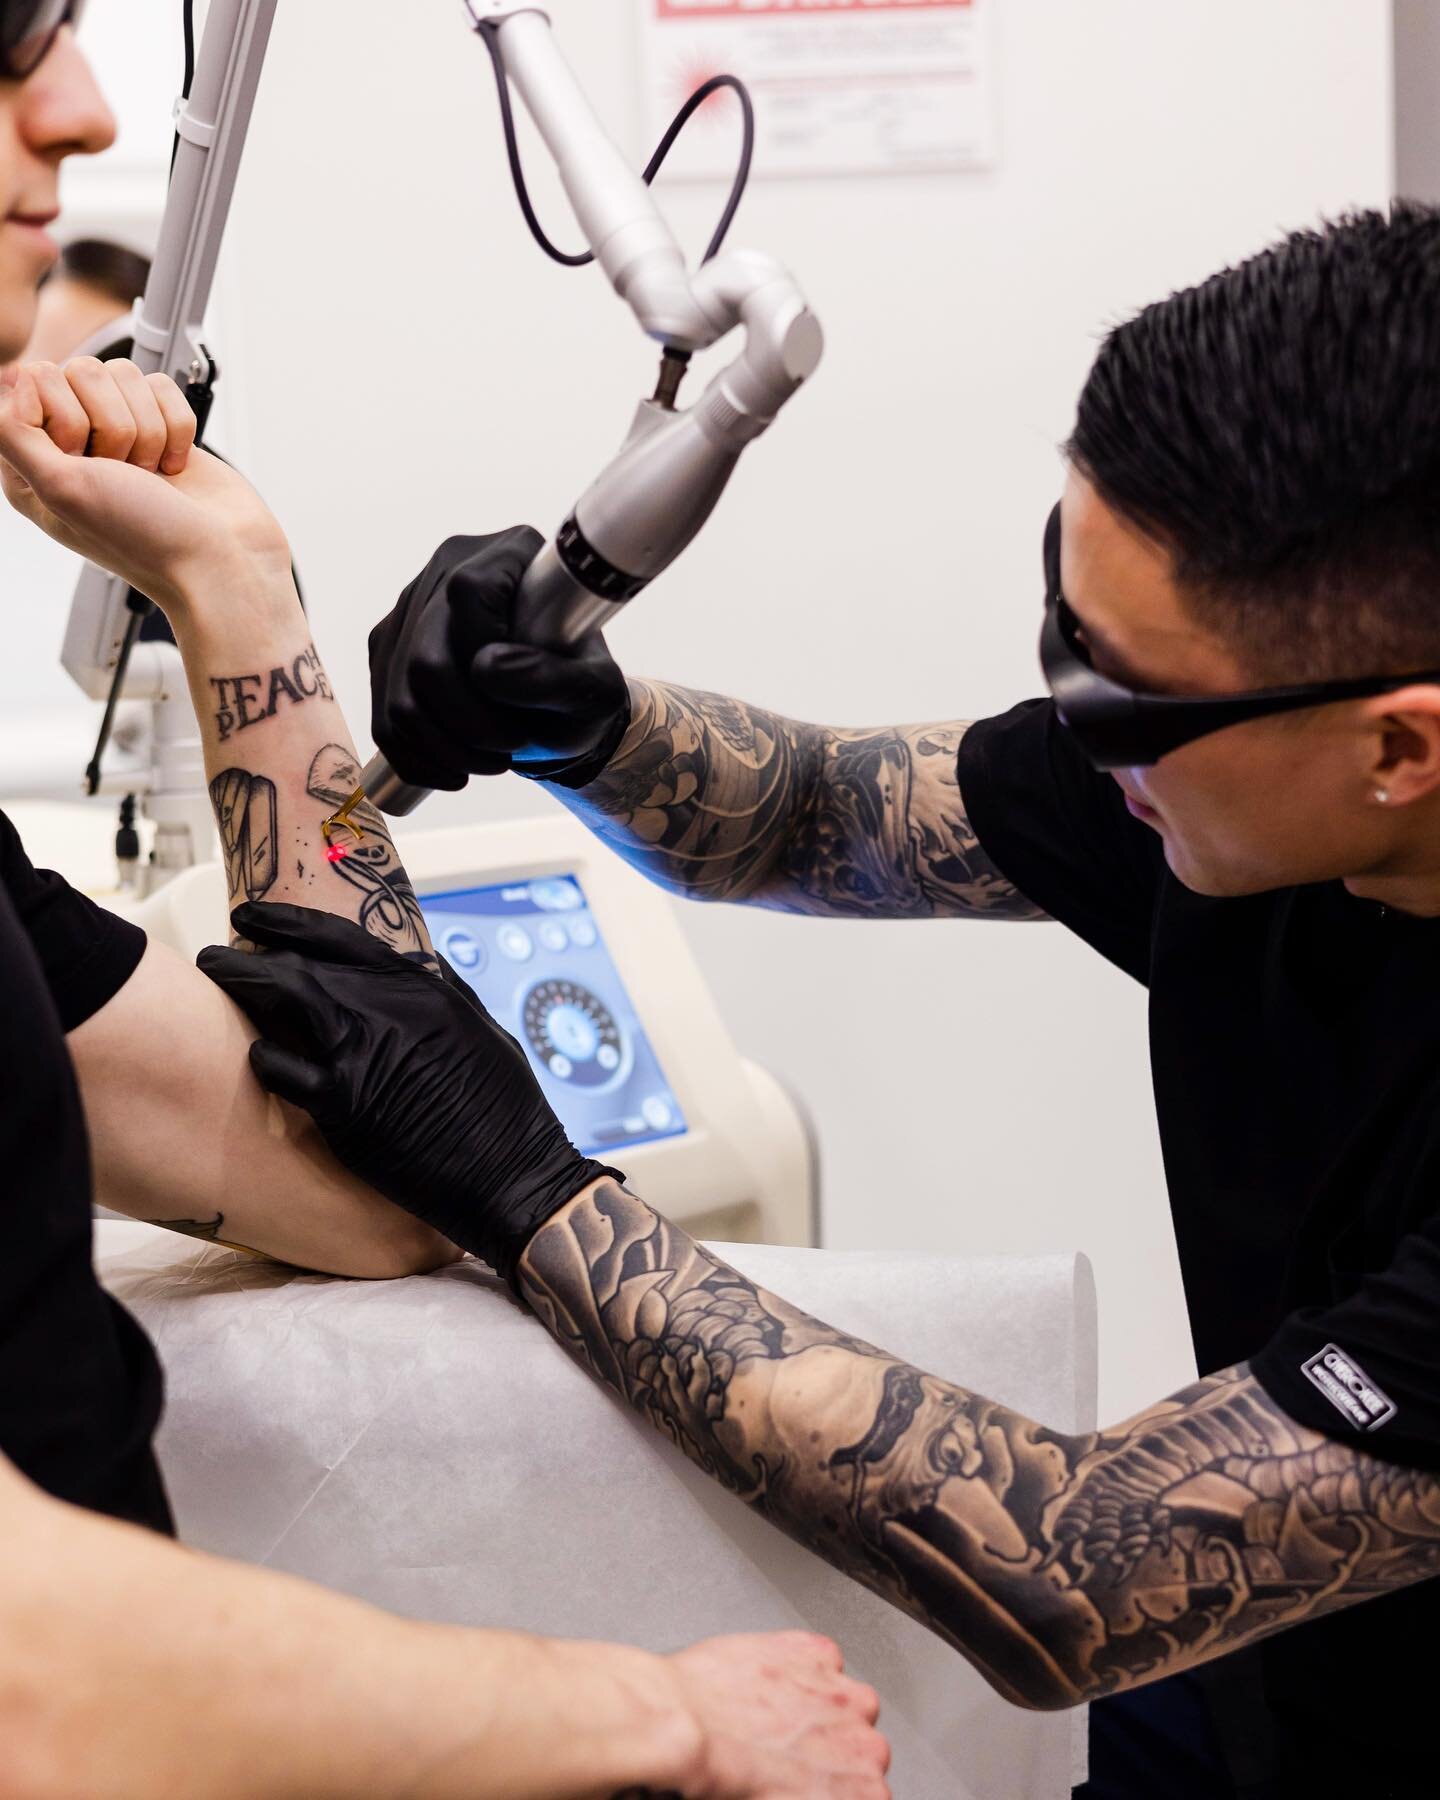 Our $200 flat rate fee for larger tattoos is a game changer!

Not only does it simplify the pricing, it helps make treatments more affordable for our clients.

We are proud to offer this unique pricing system and make Laser Tattoo Removal with the Pi